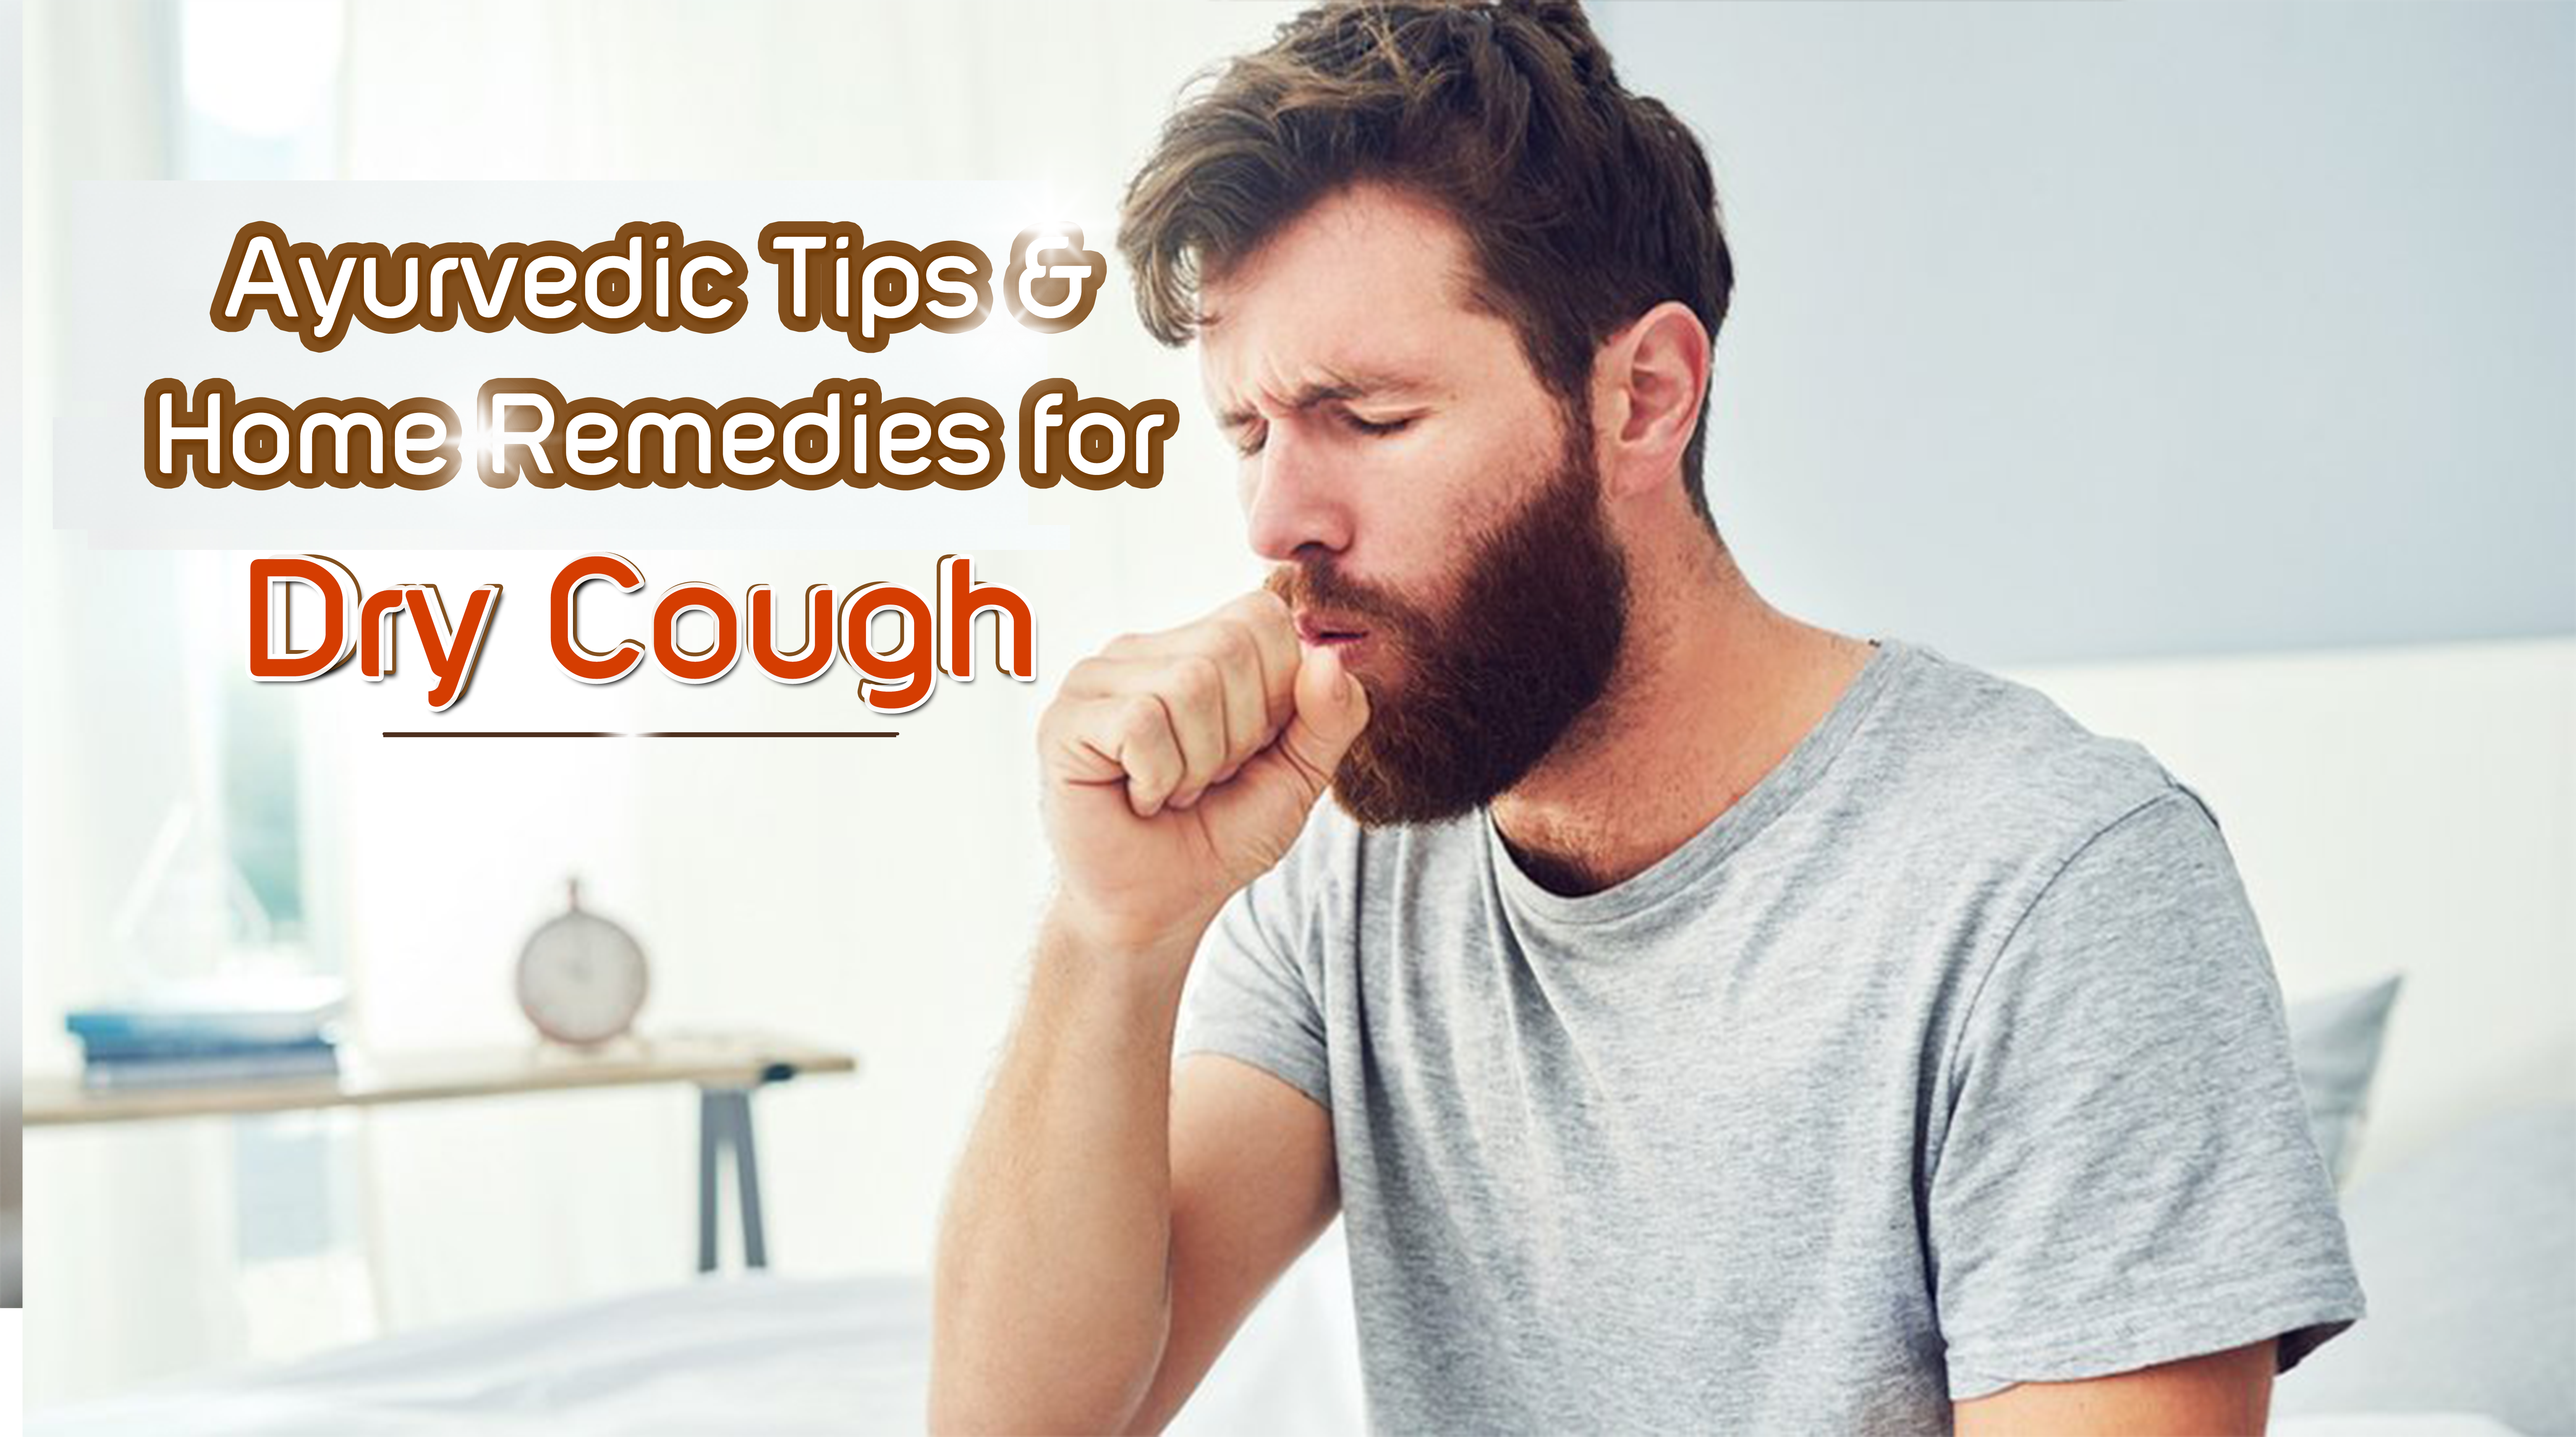 Gain Relief from Dry Cough with these Ayurvedic Tips